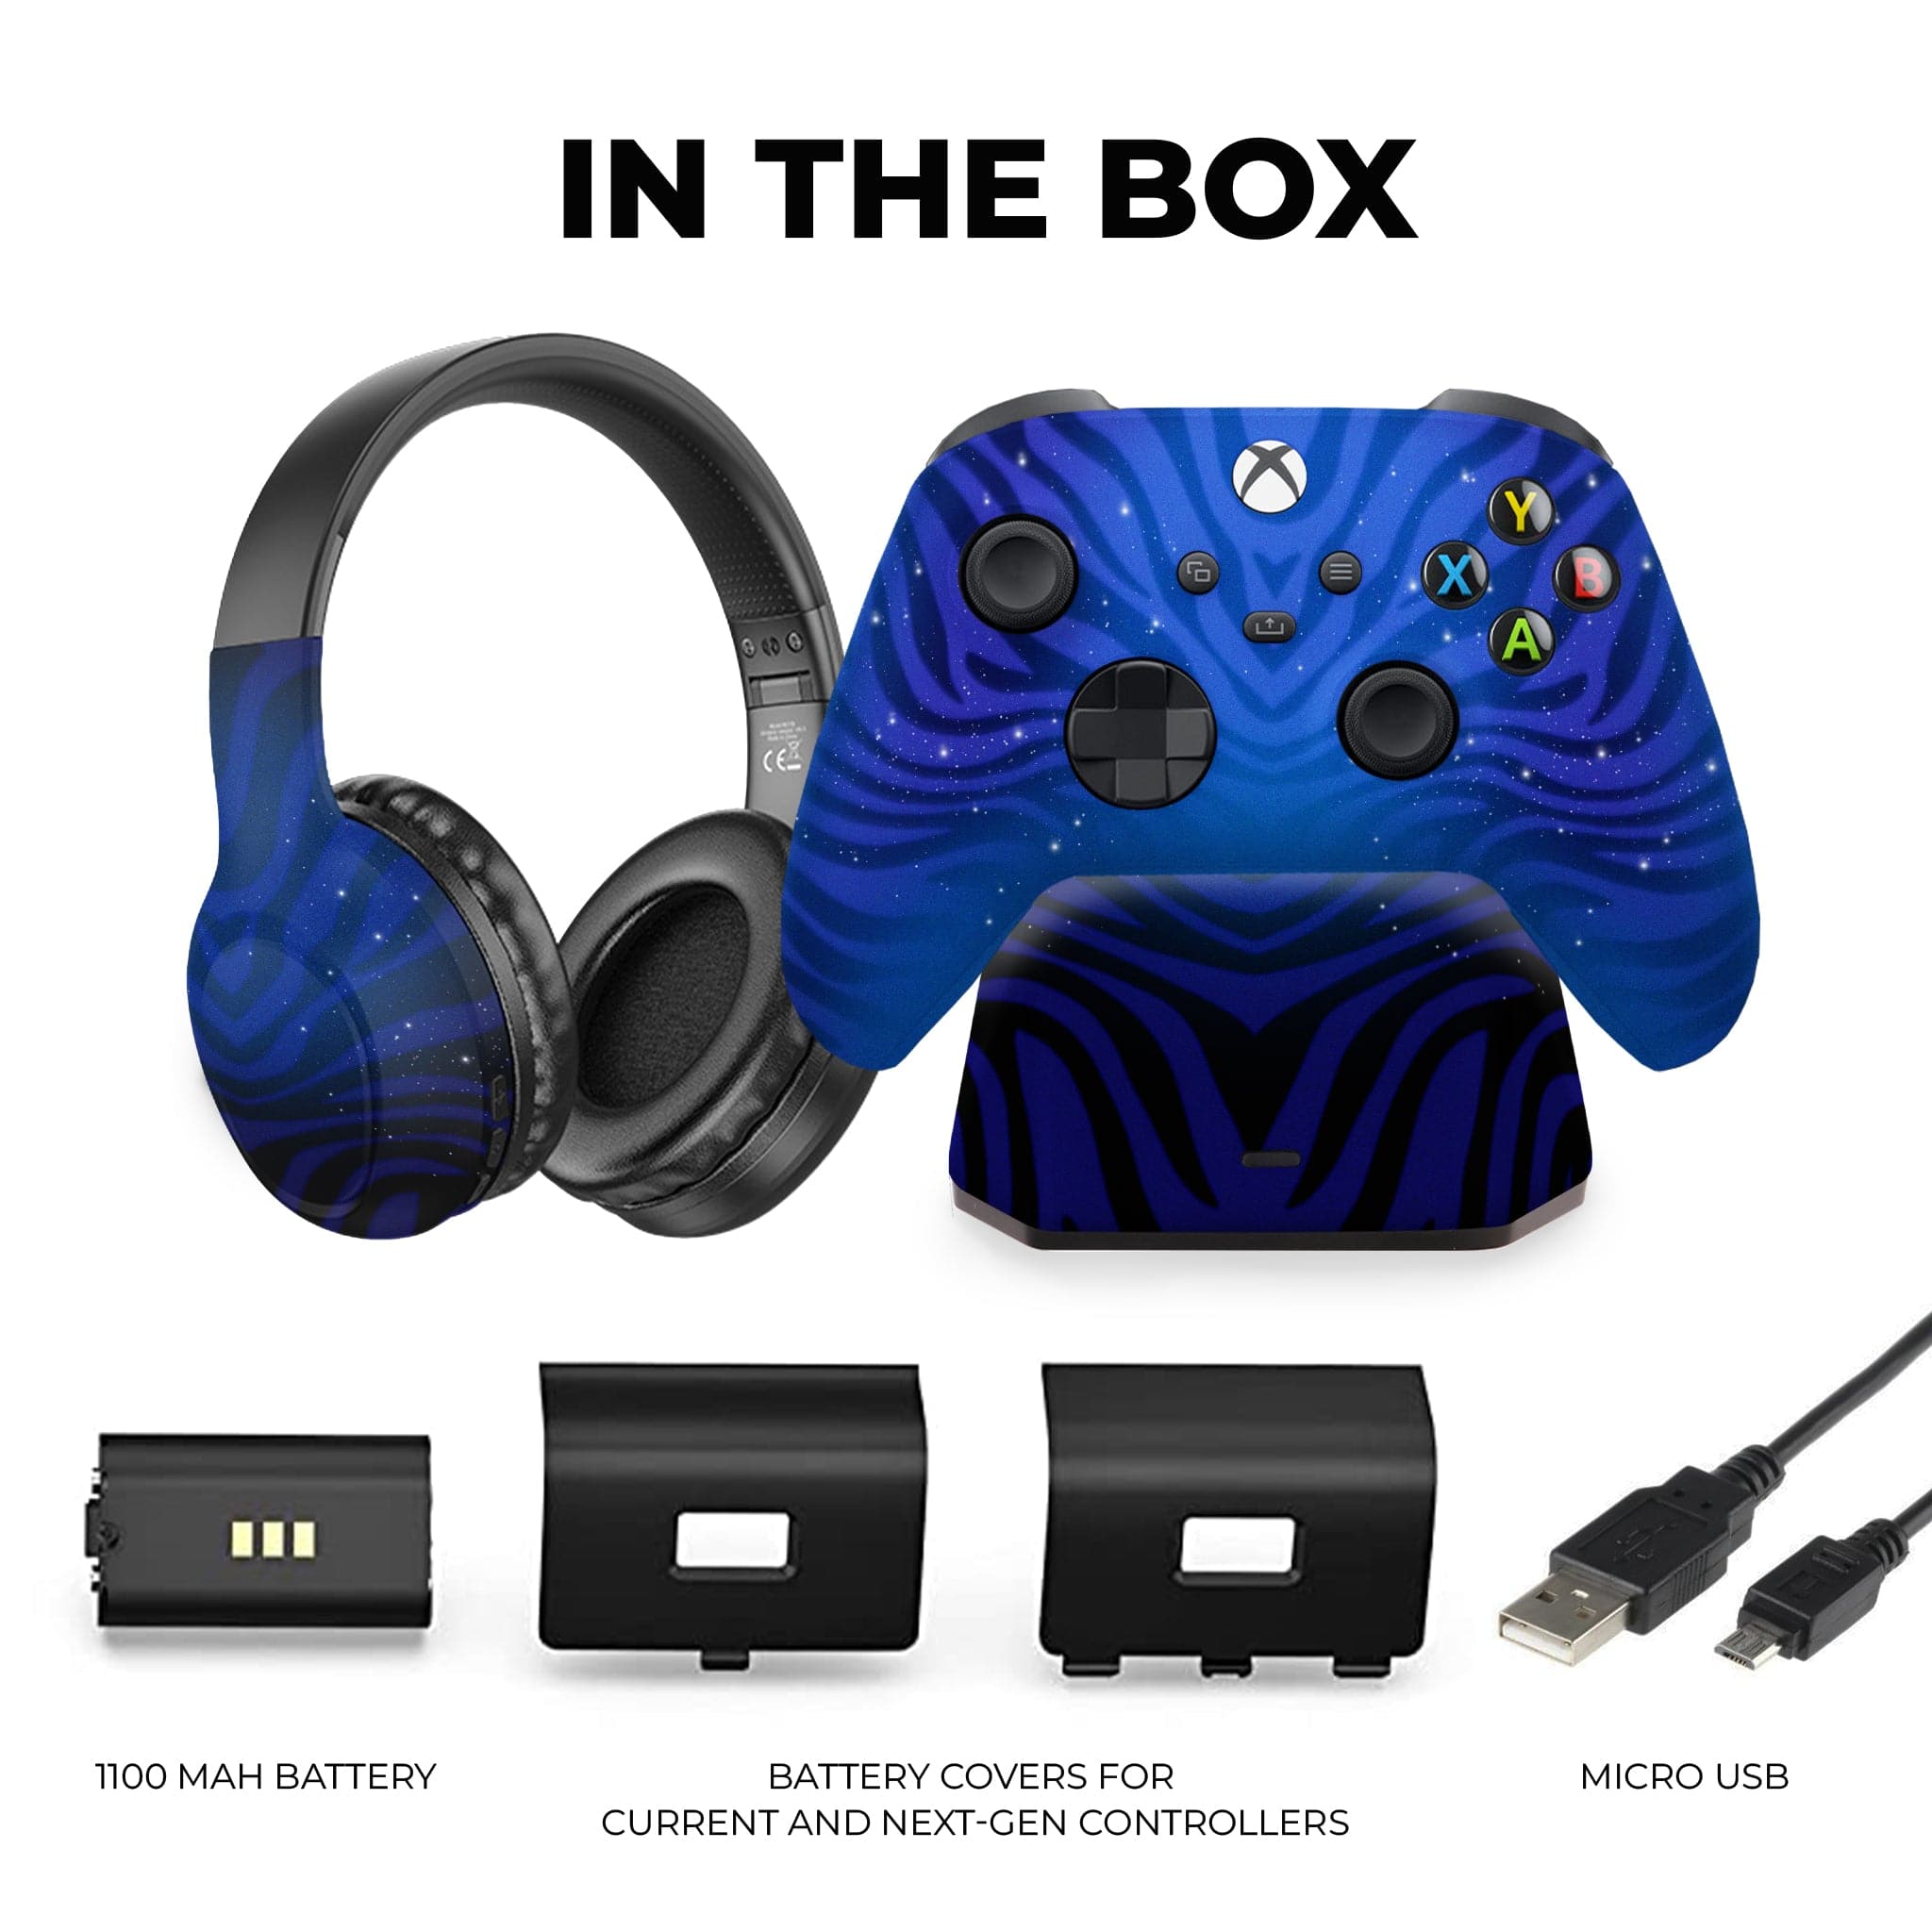 Avatar: The way of Water inspired Xbox Series X Modded Controller with Charging Station & Headphone